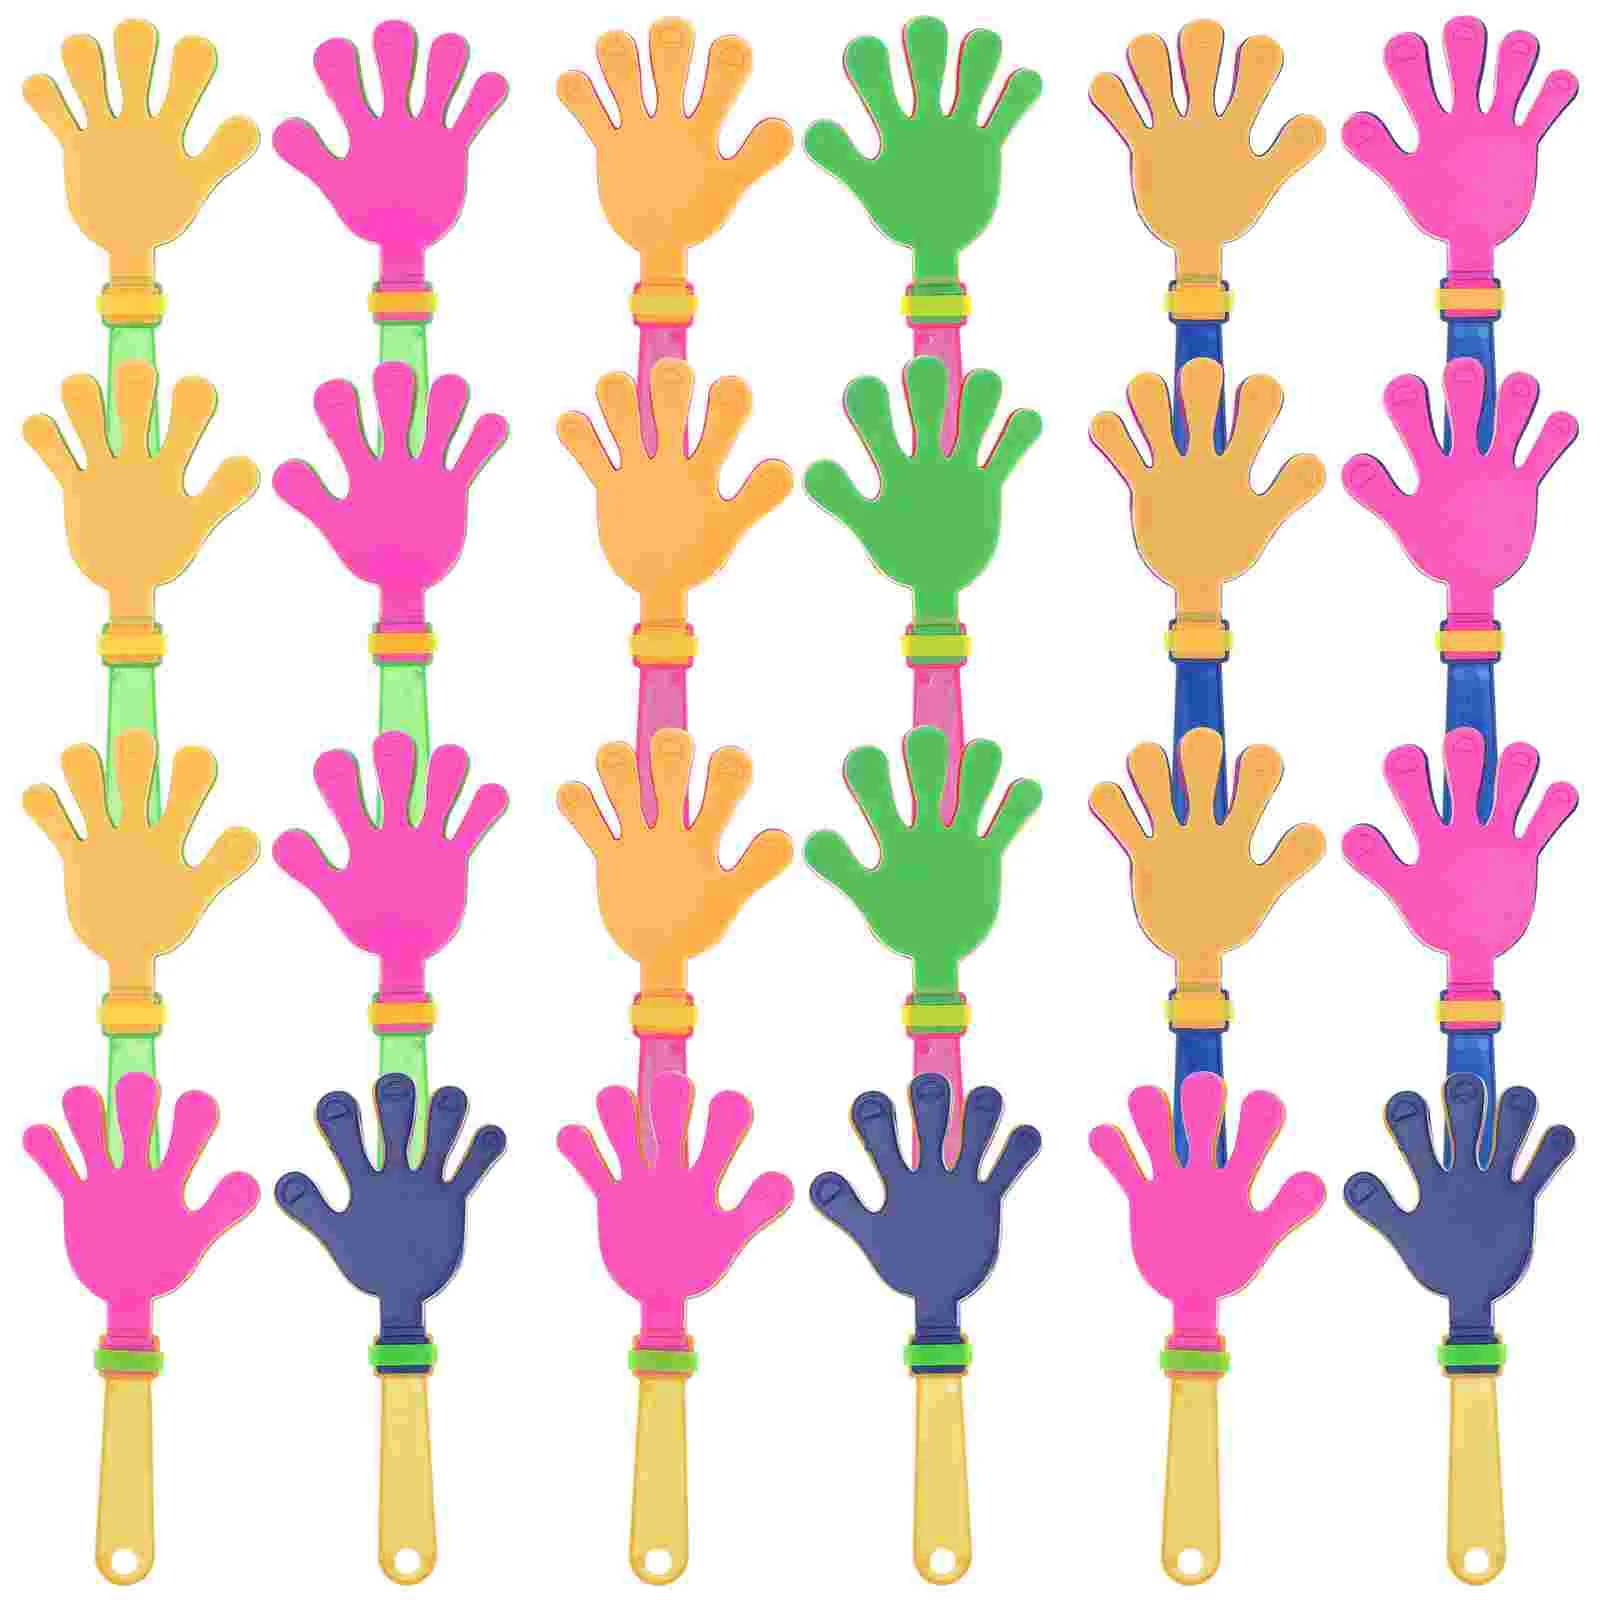 24pcs Hand Clappers Noise Makers Birthday Party Clappers Concert Sporting Events Noisemakers (Random Color)